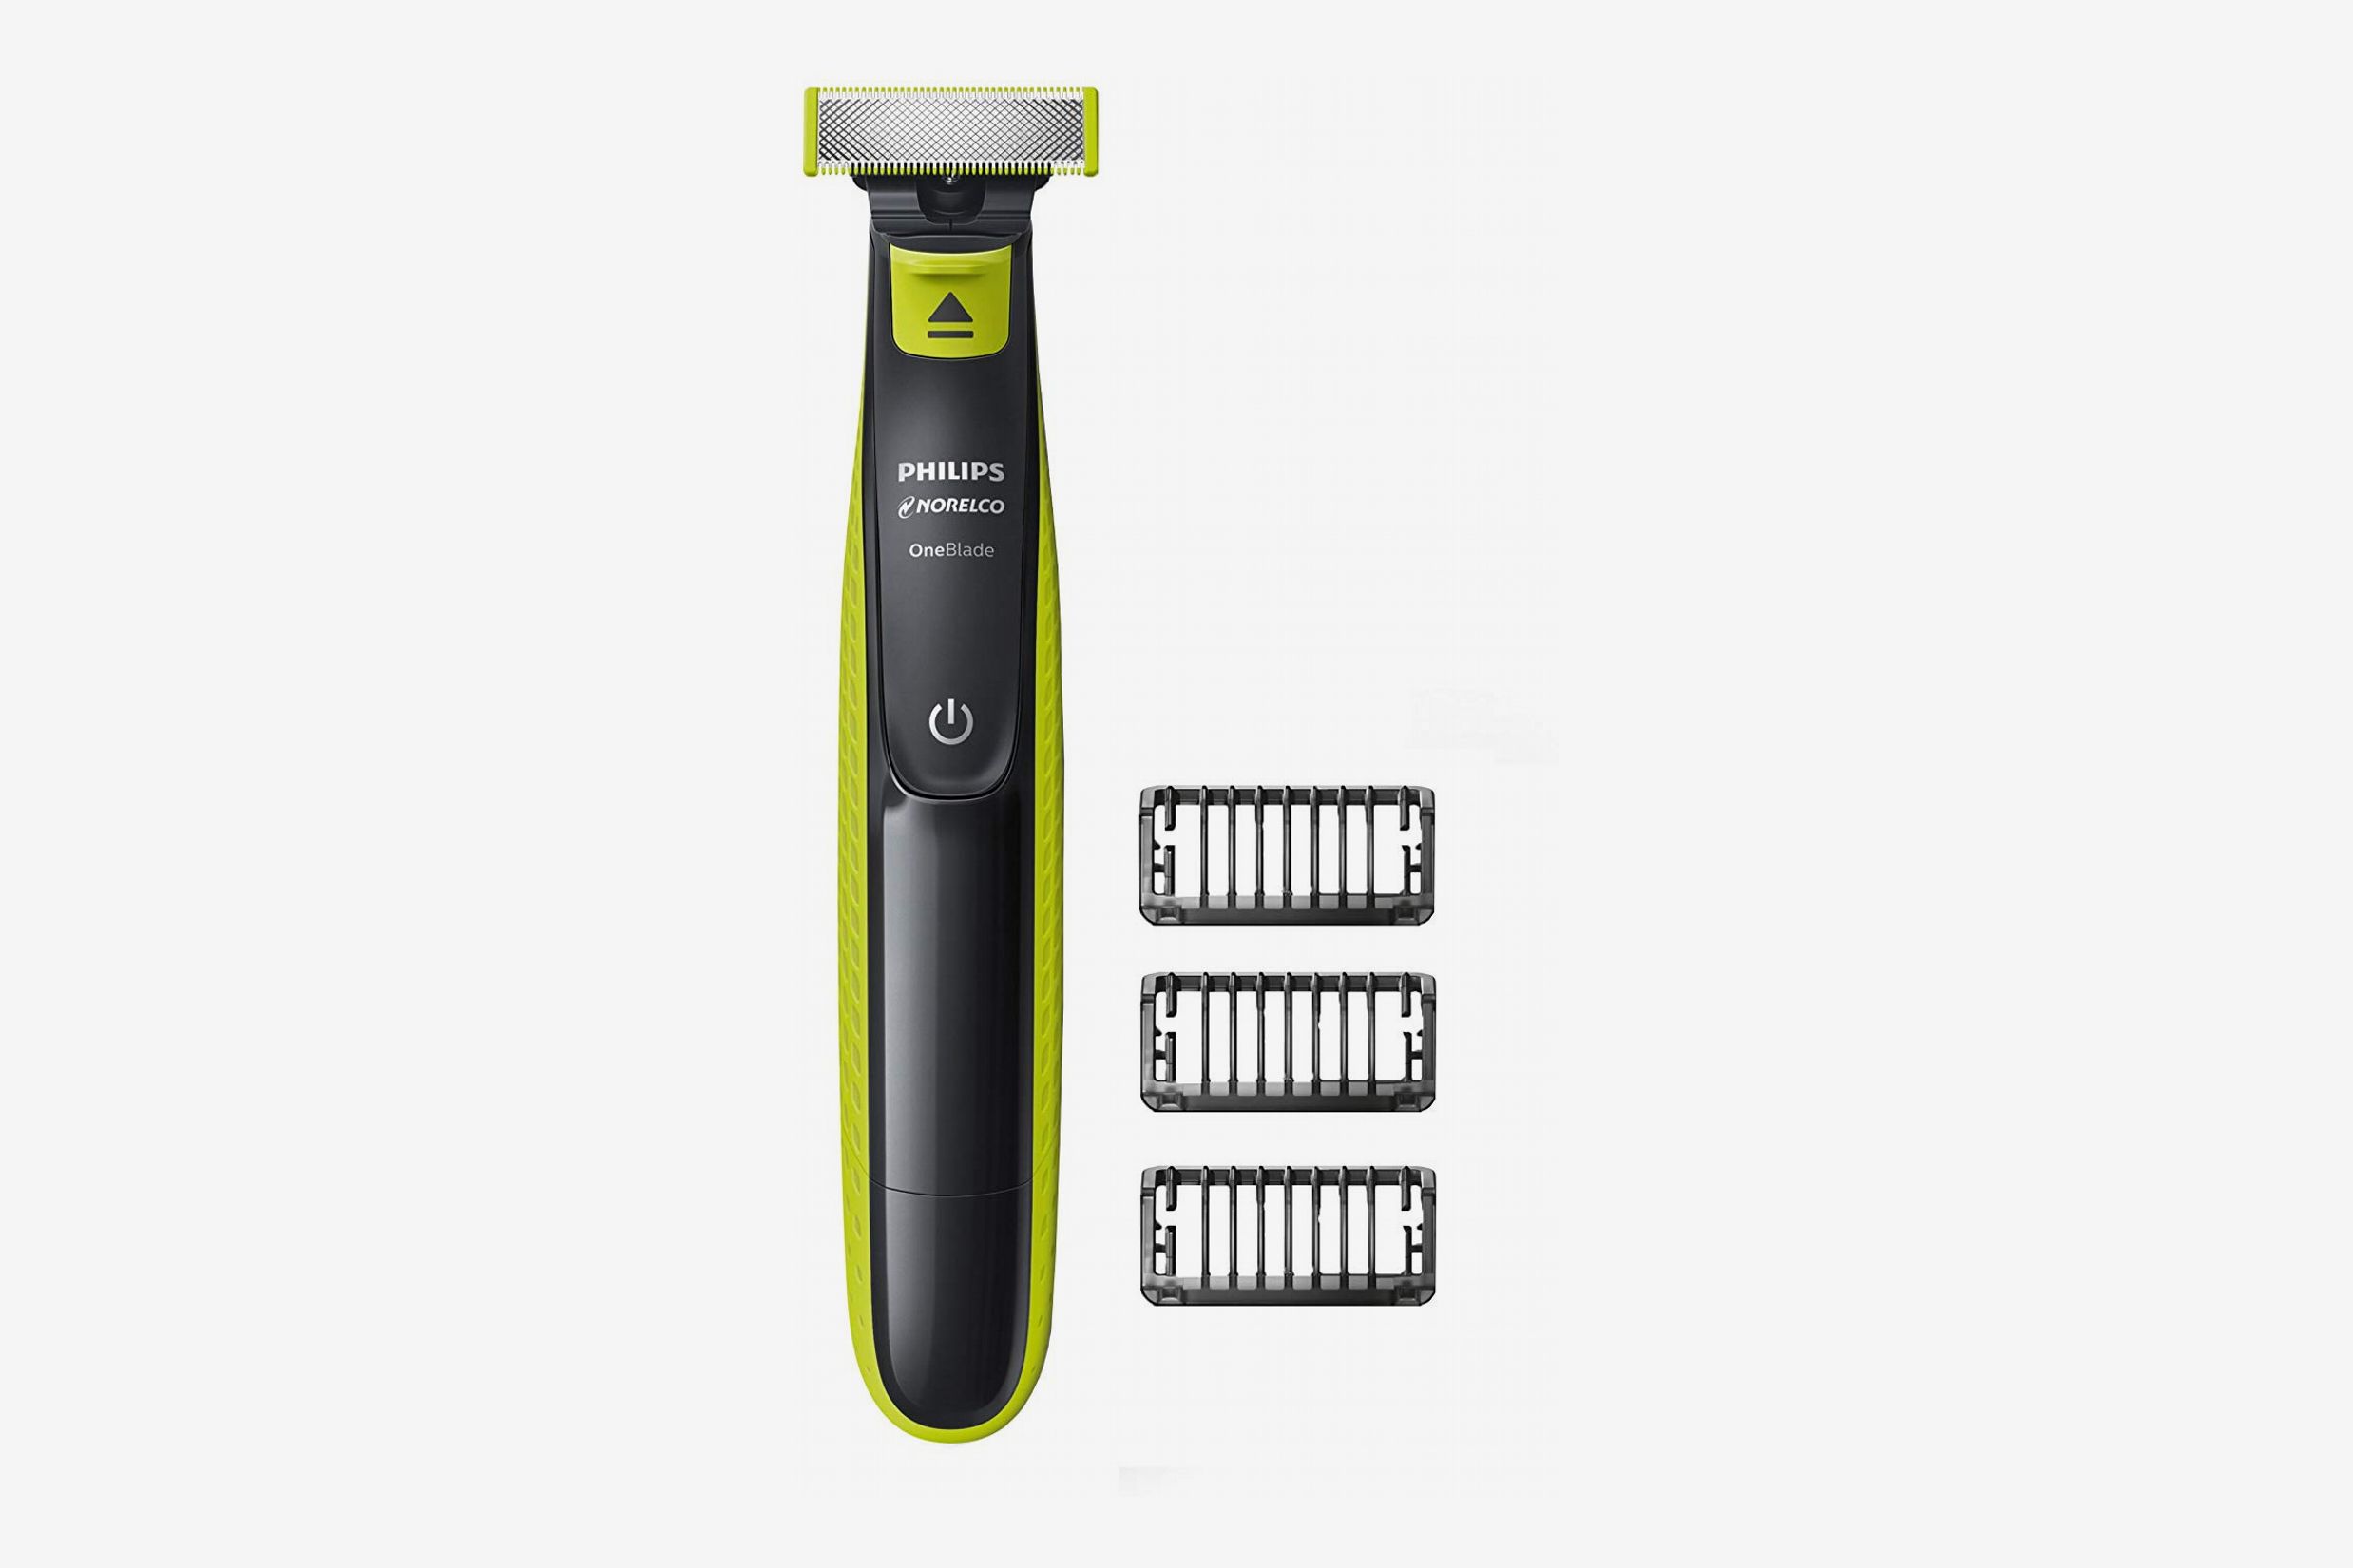 Philips Beard Trimmer Review 2020 | The Strategist